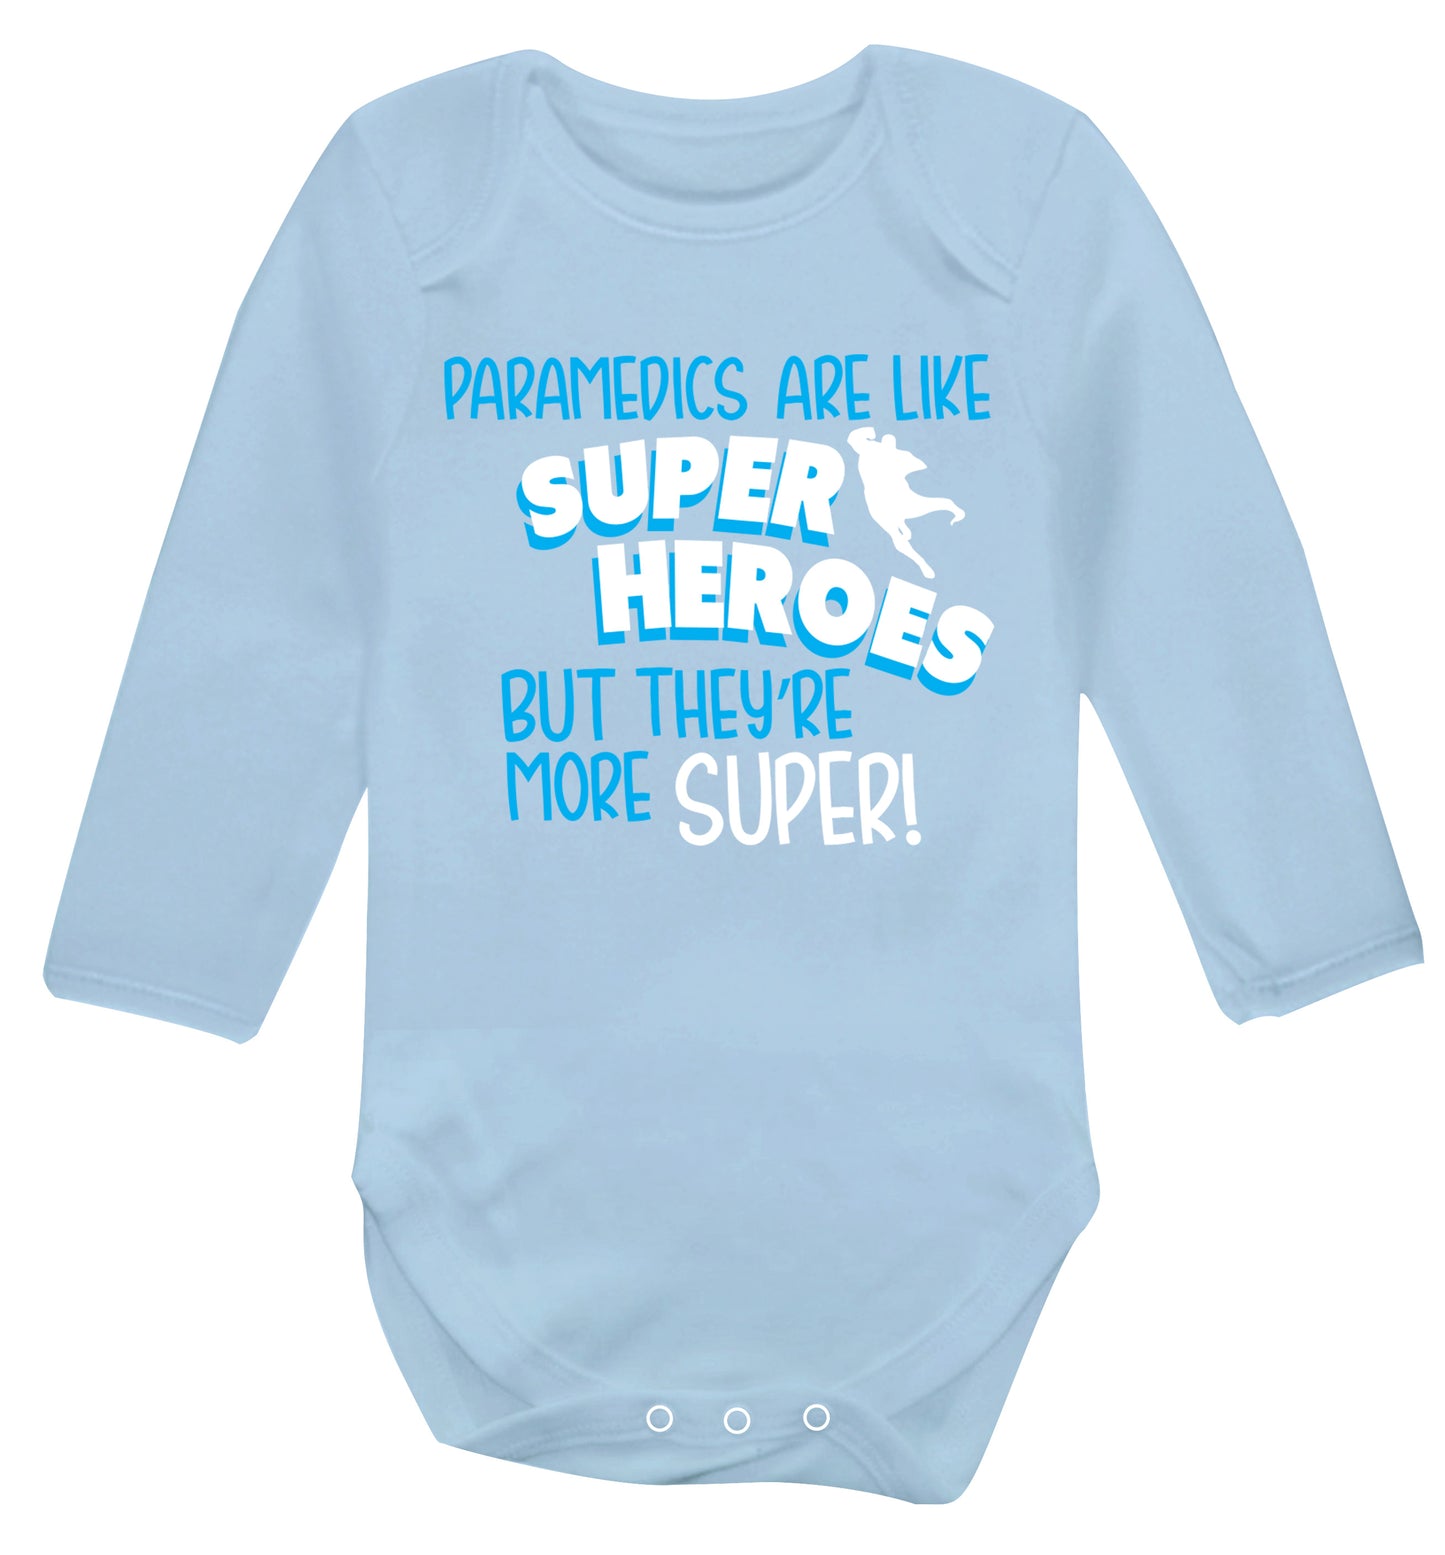 Paramedics are like superheros but they're more super Baby Vest long sleeved pale blue 6-12 months